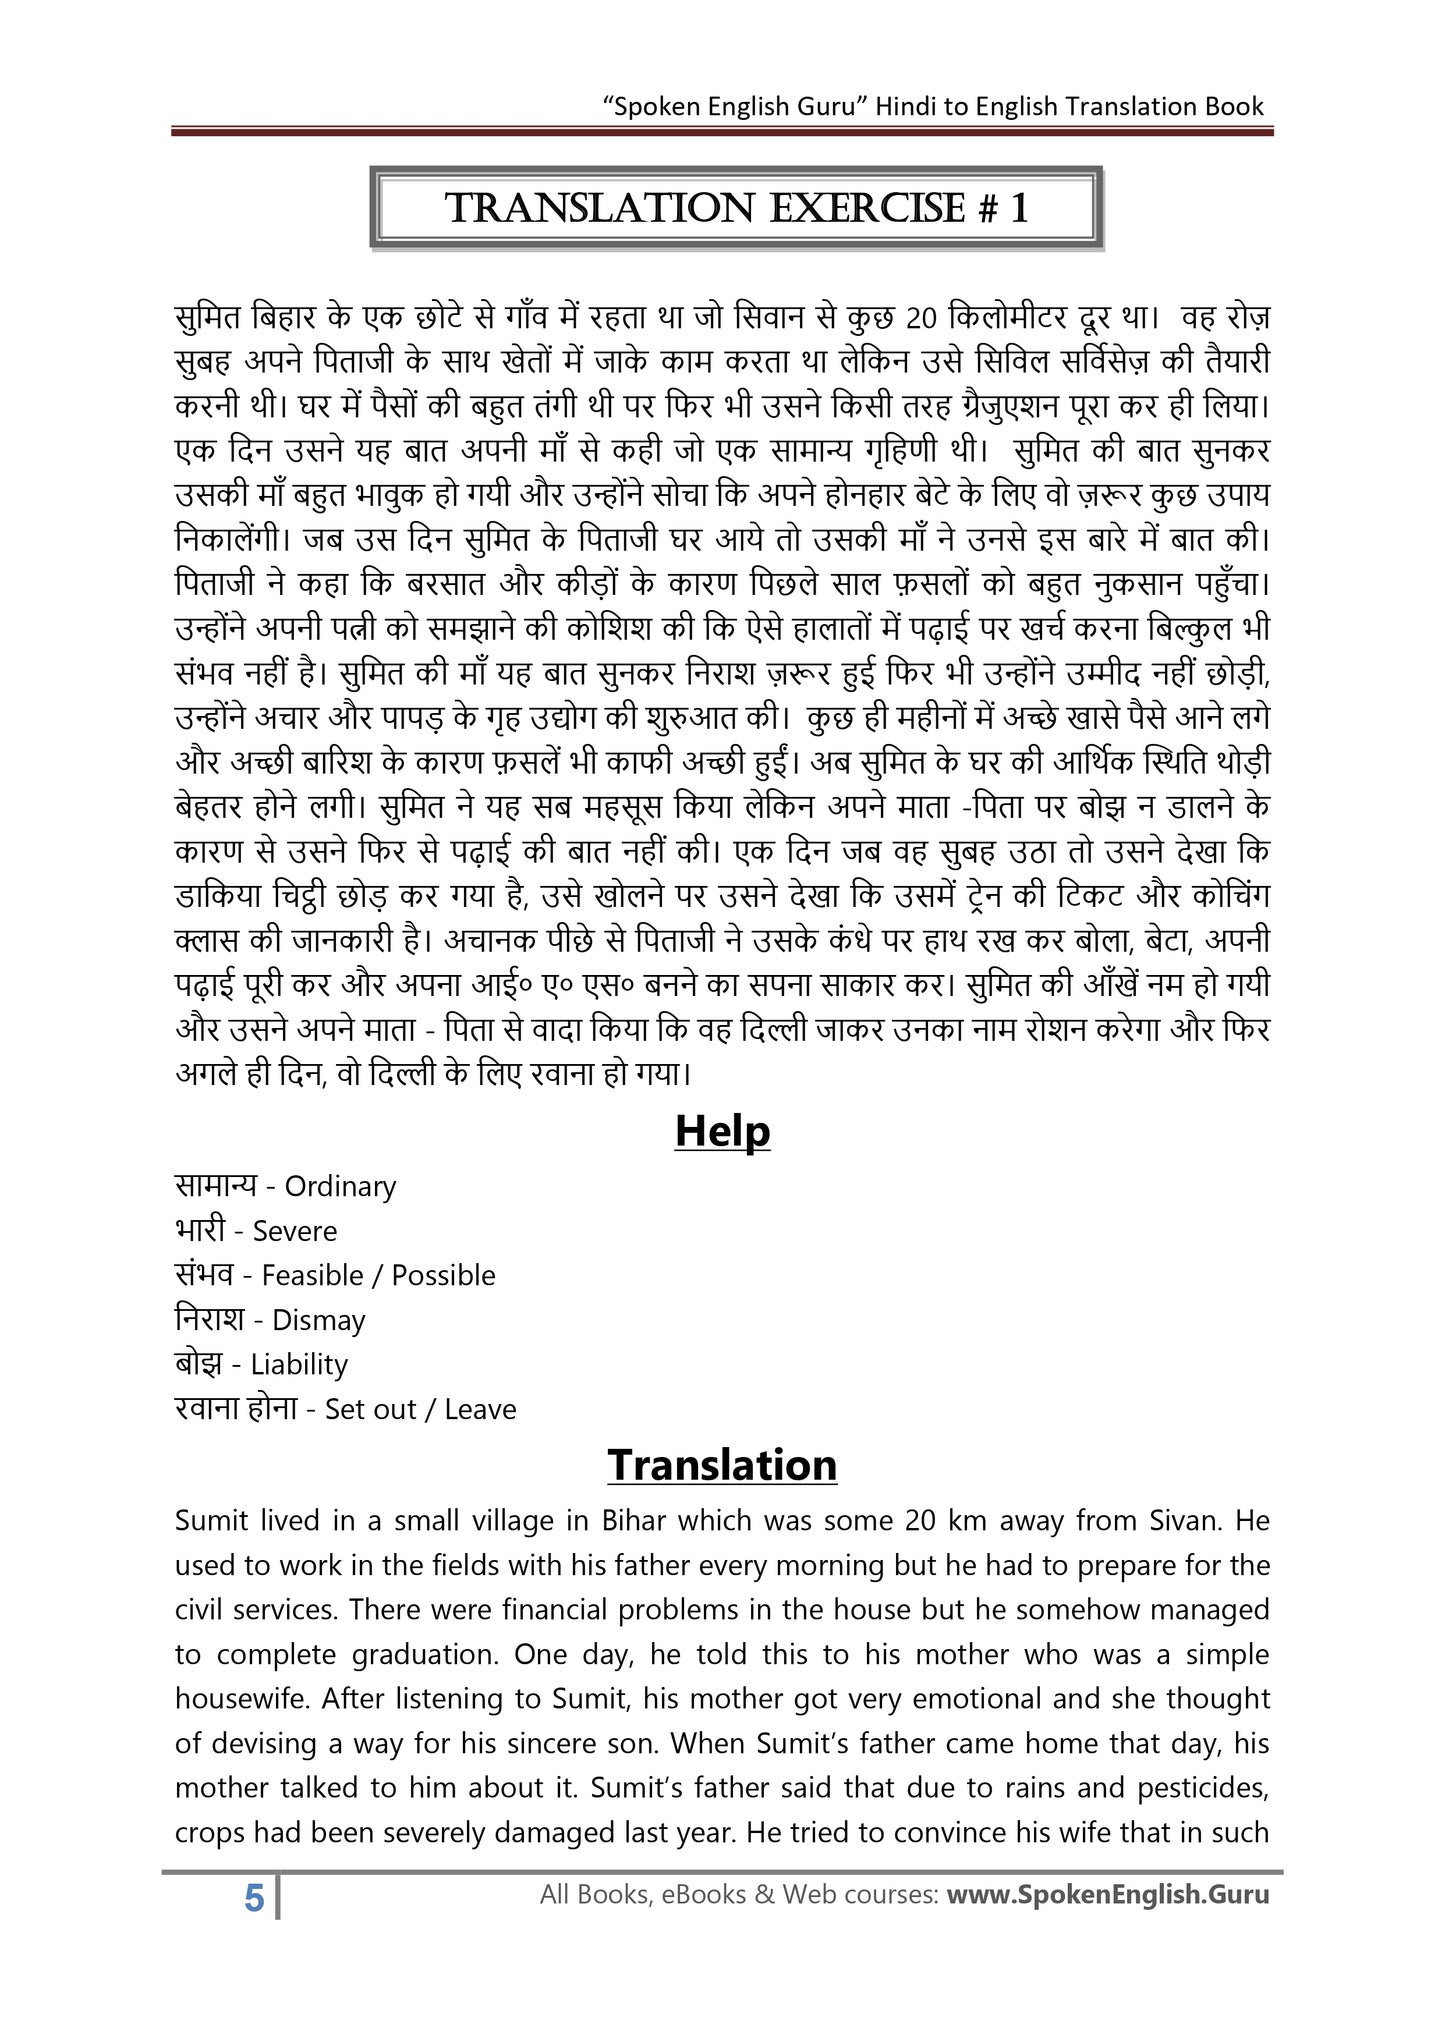 Hindi to English Translation Book - Long and Short Paragraphs Included